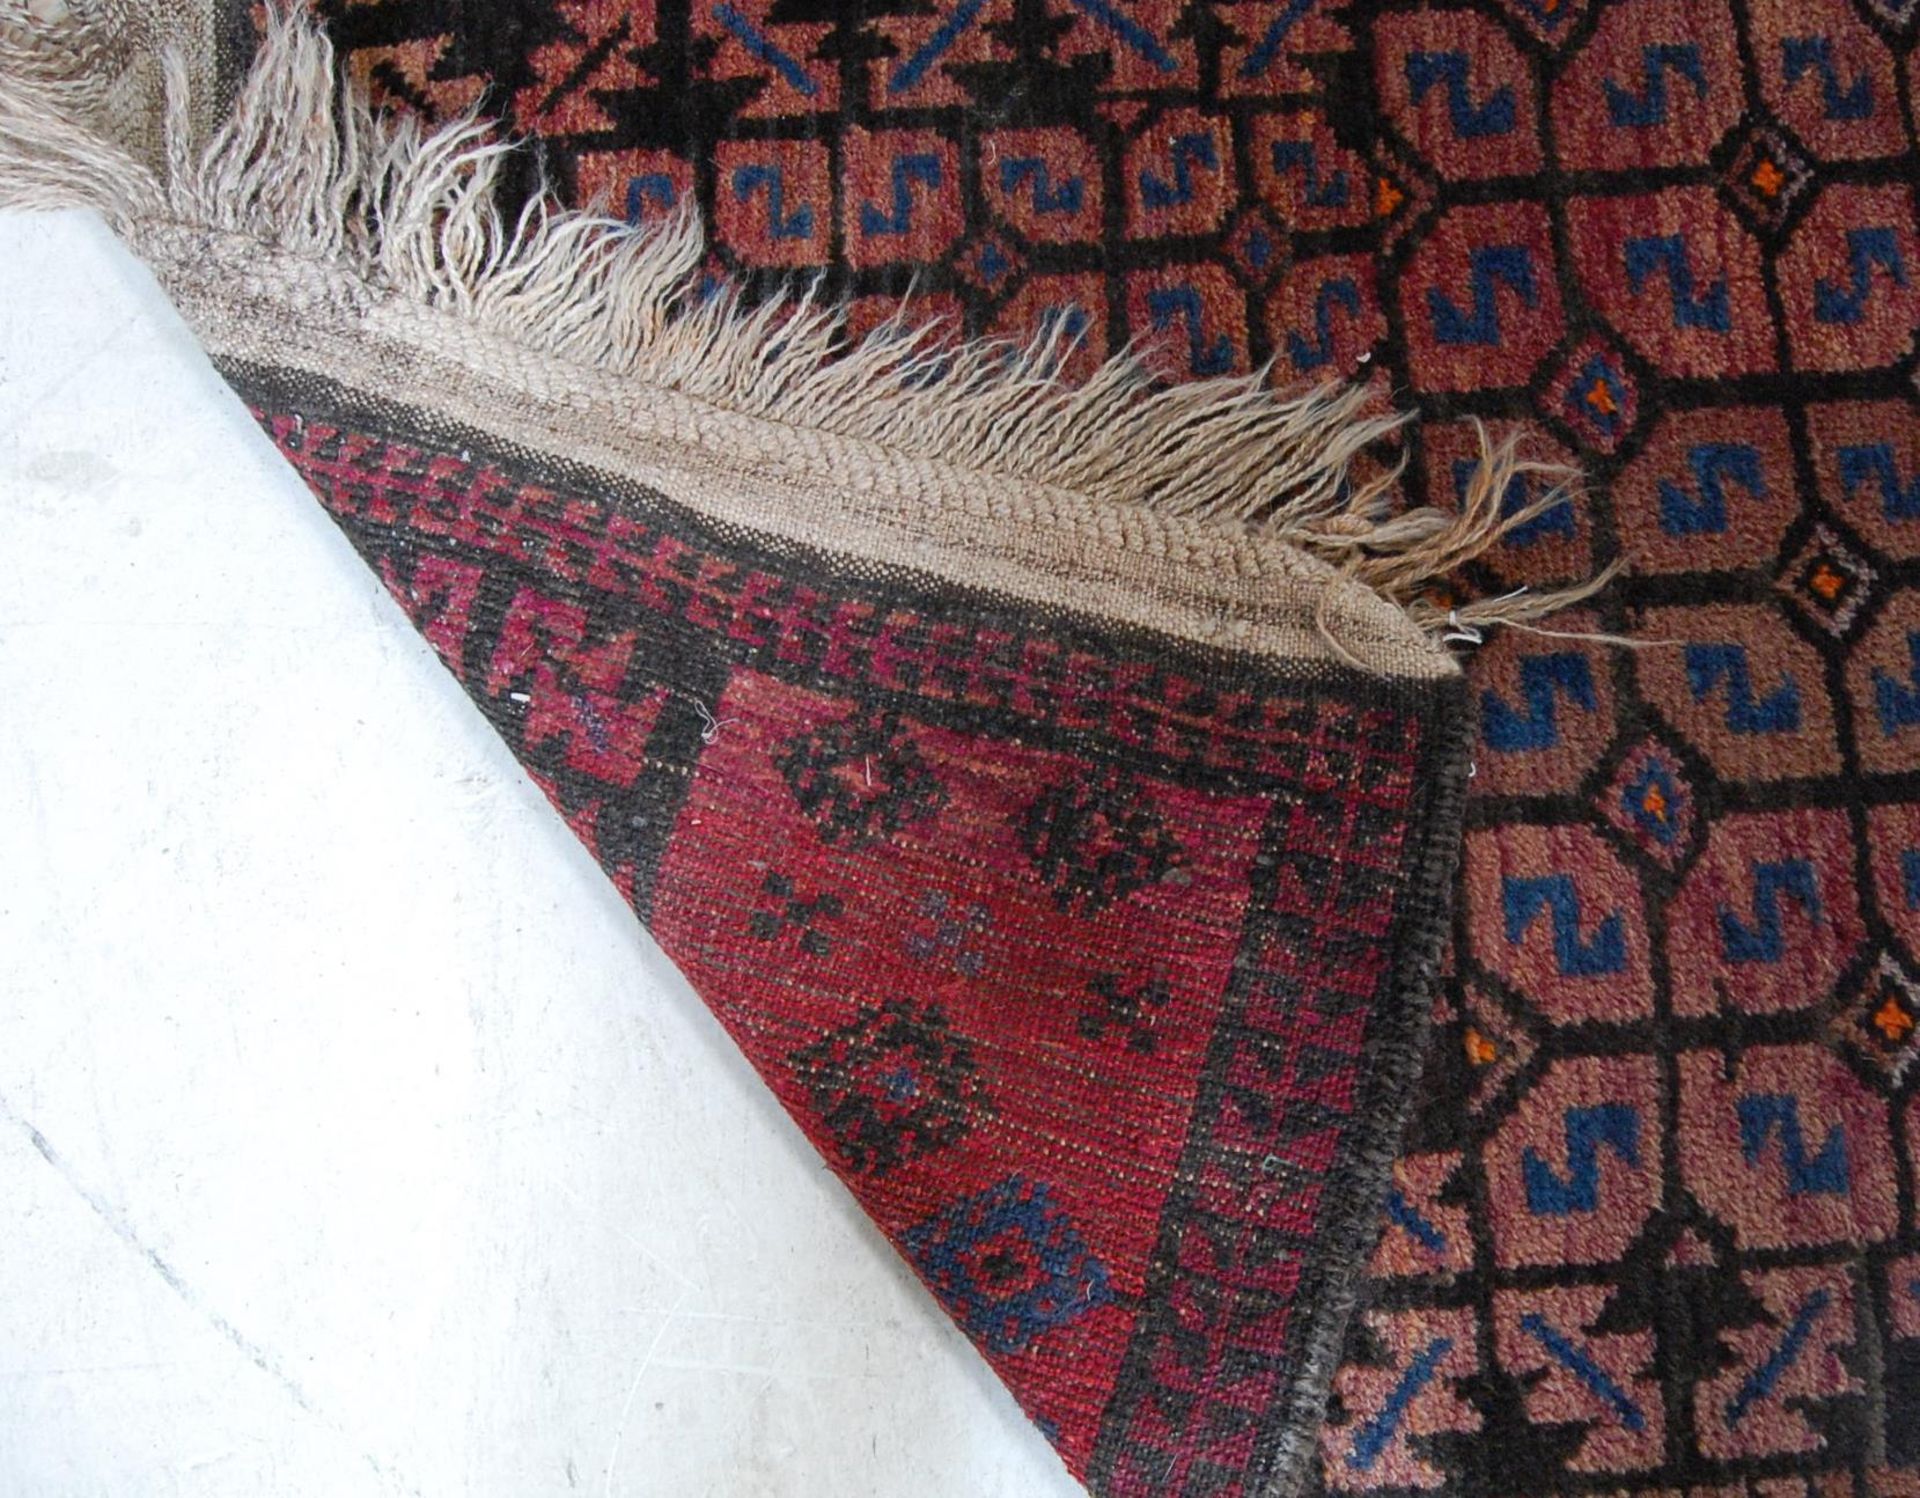 EARLY 20TH CENTURY HAND WOVEN RUG. - Image 6 of 6